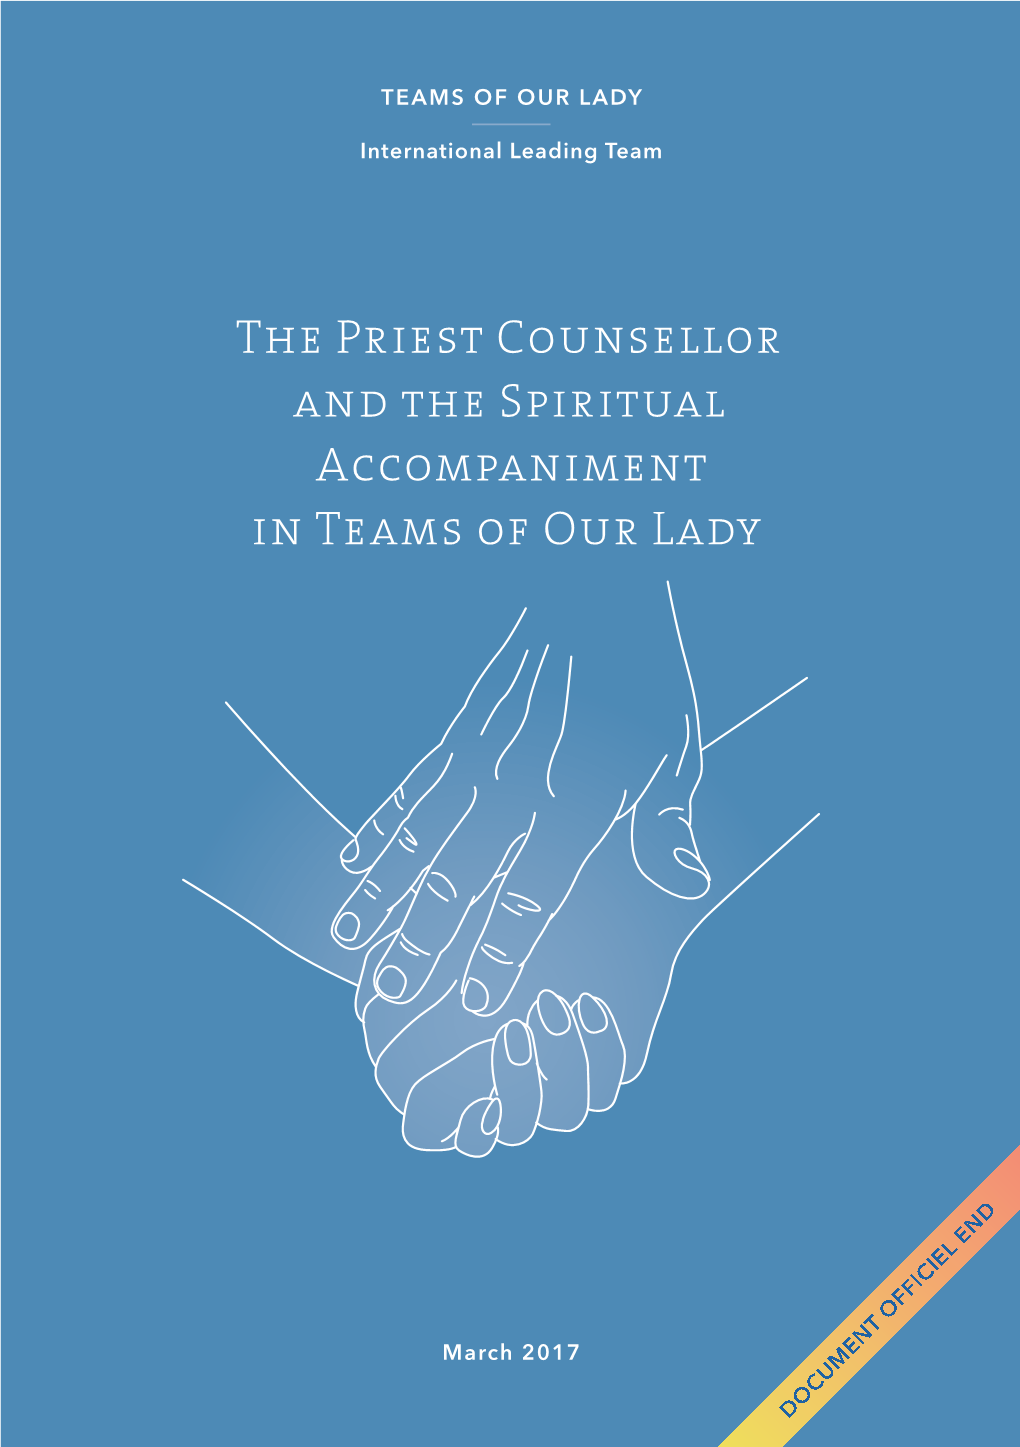 The Priest Counsellor and the Spiritual Accompaniment in Teams of Our Lady